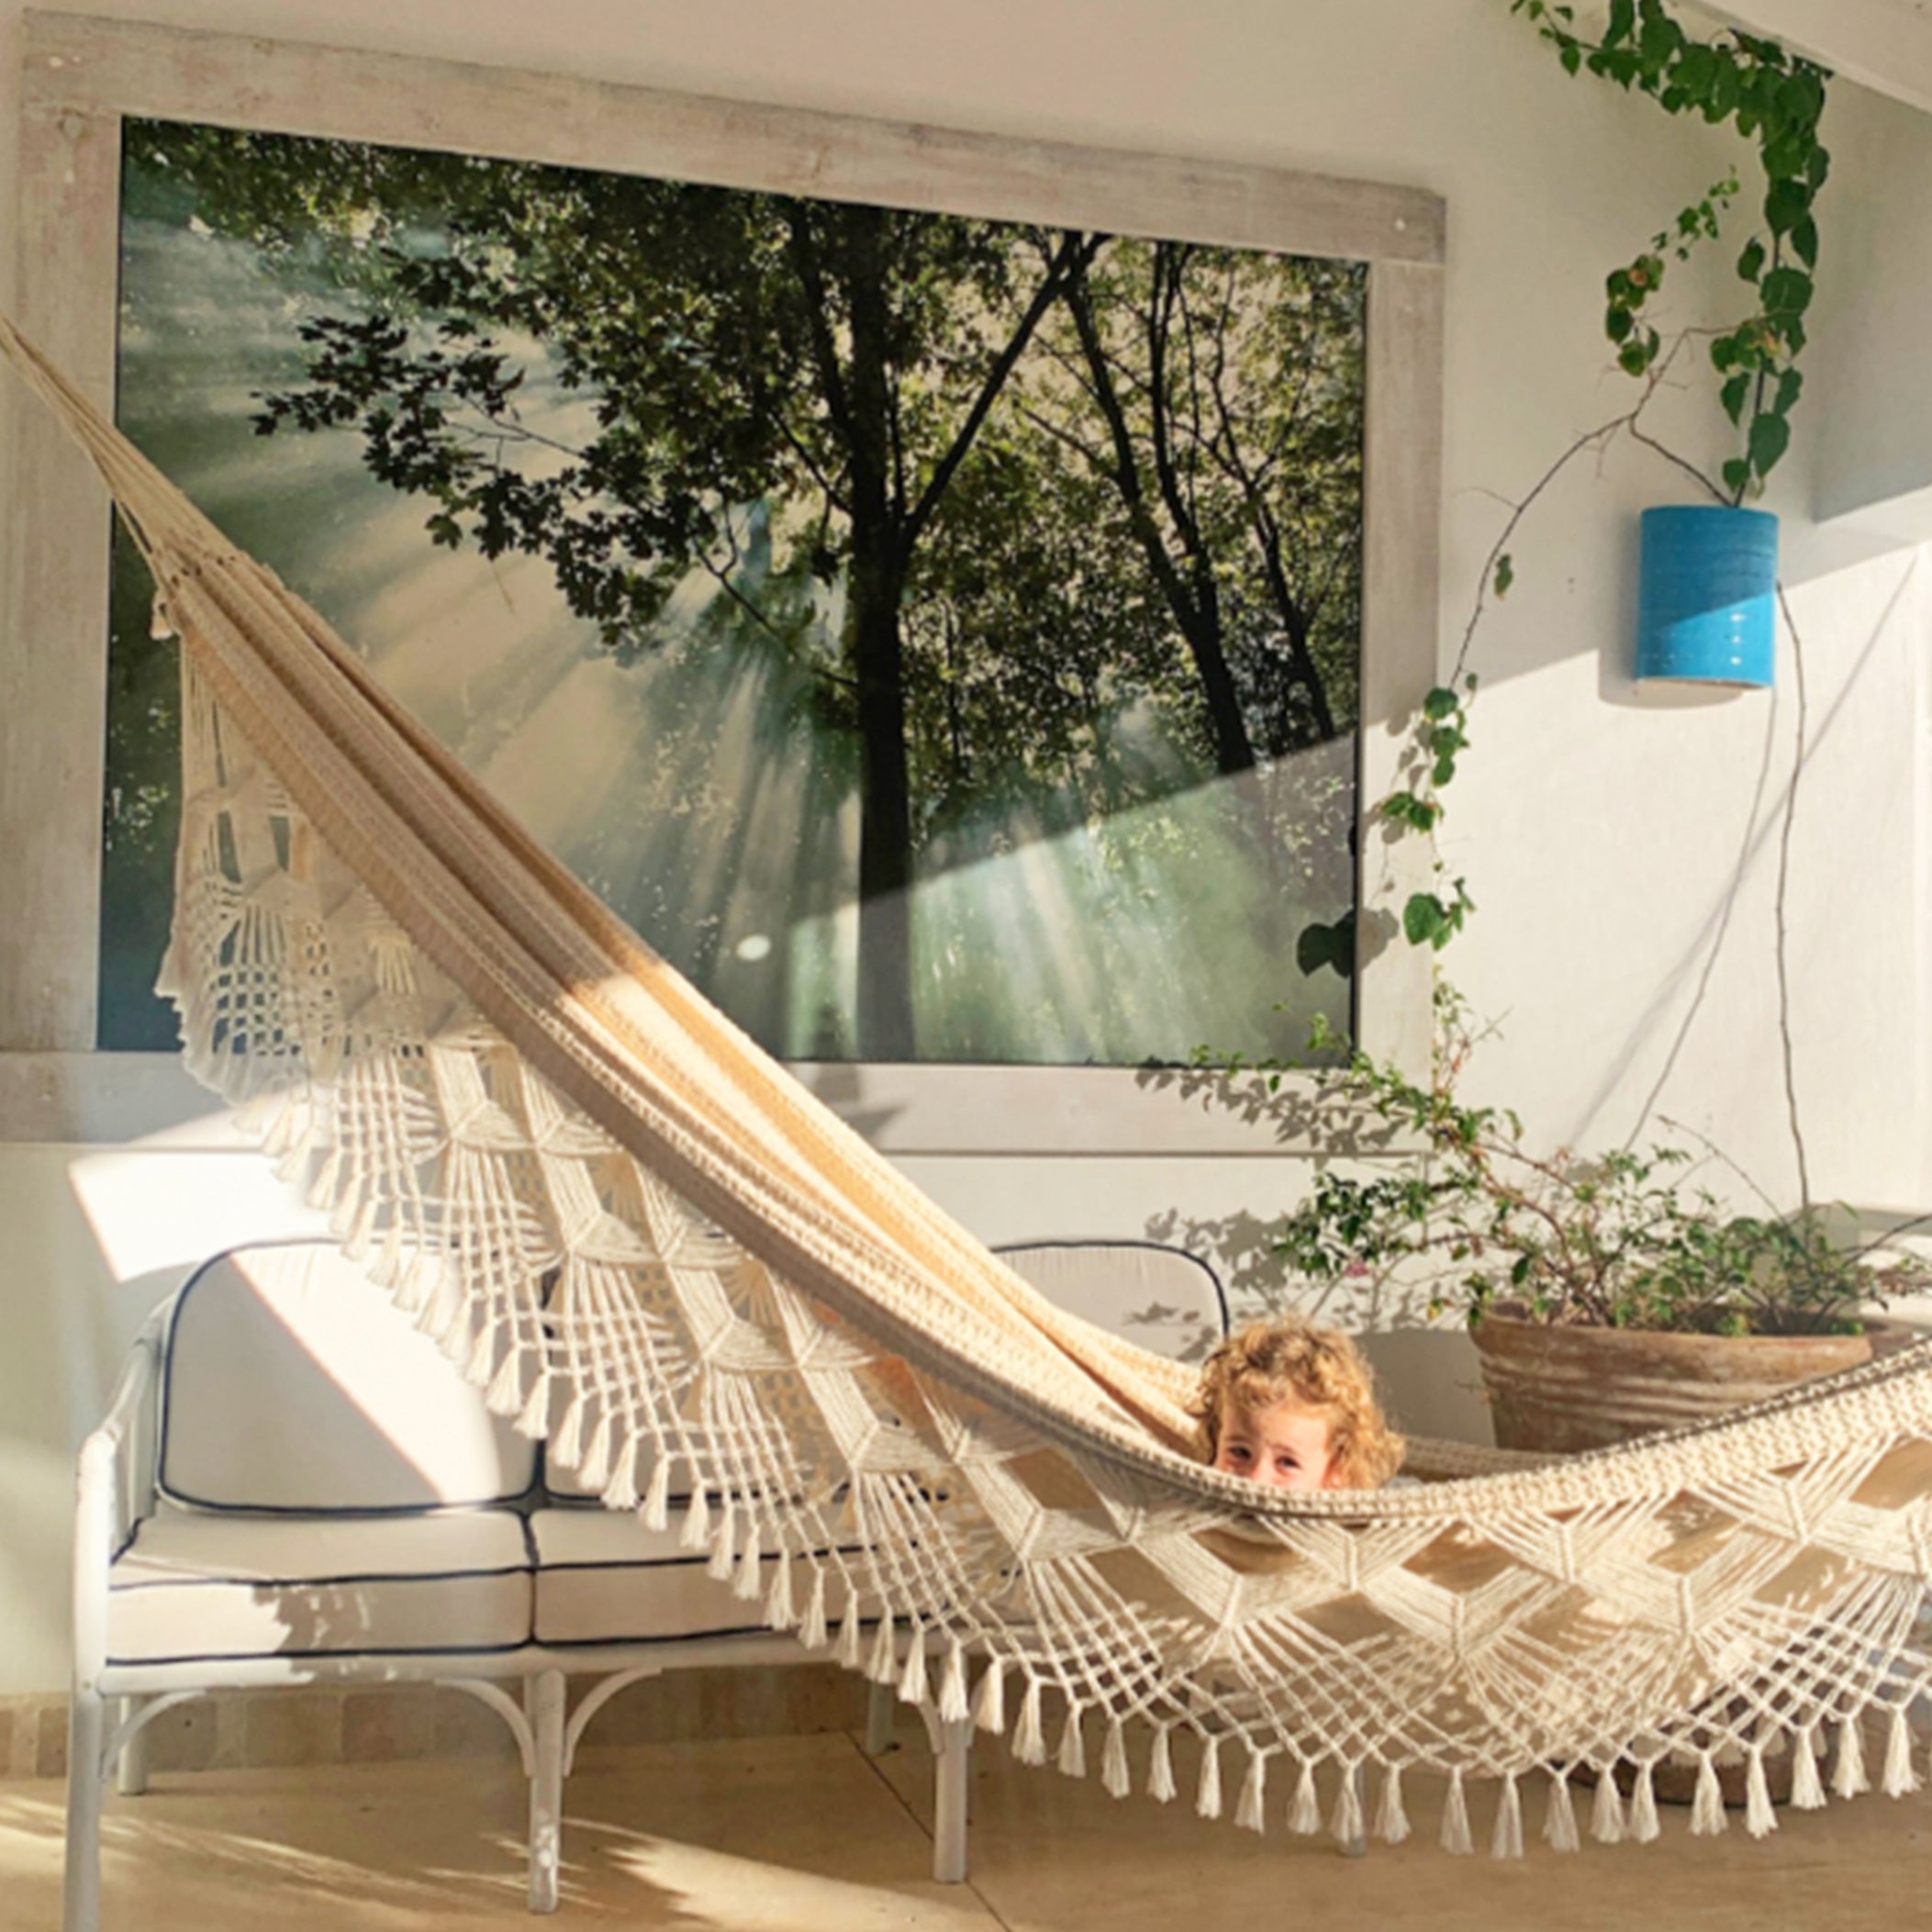 Tropical patio with toddler in string hammock